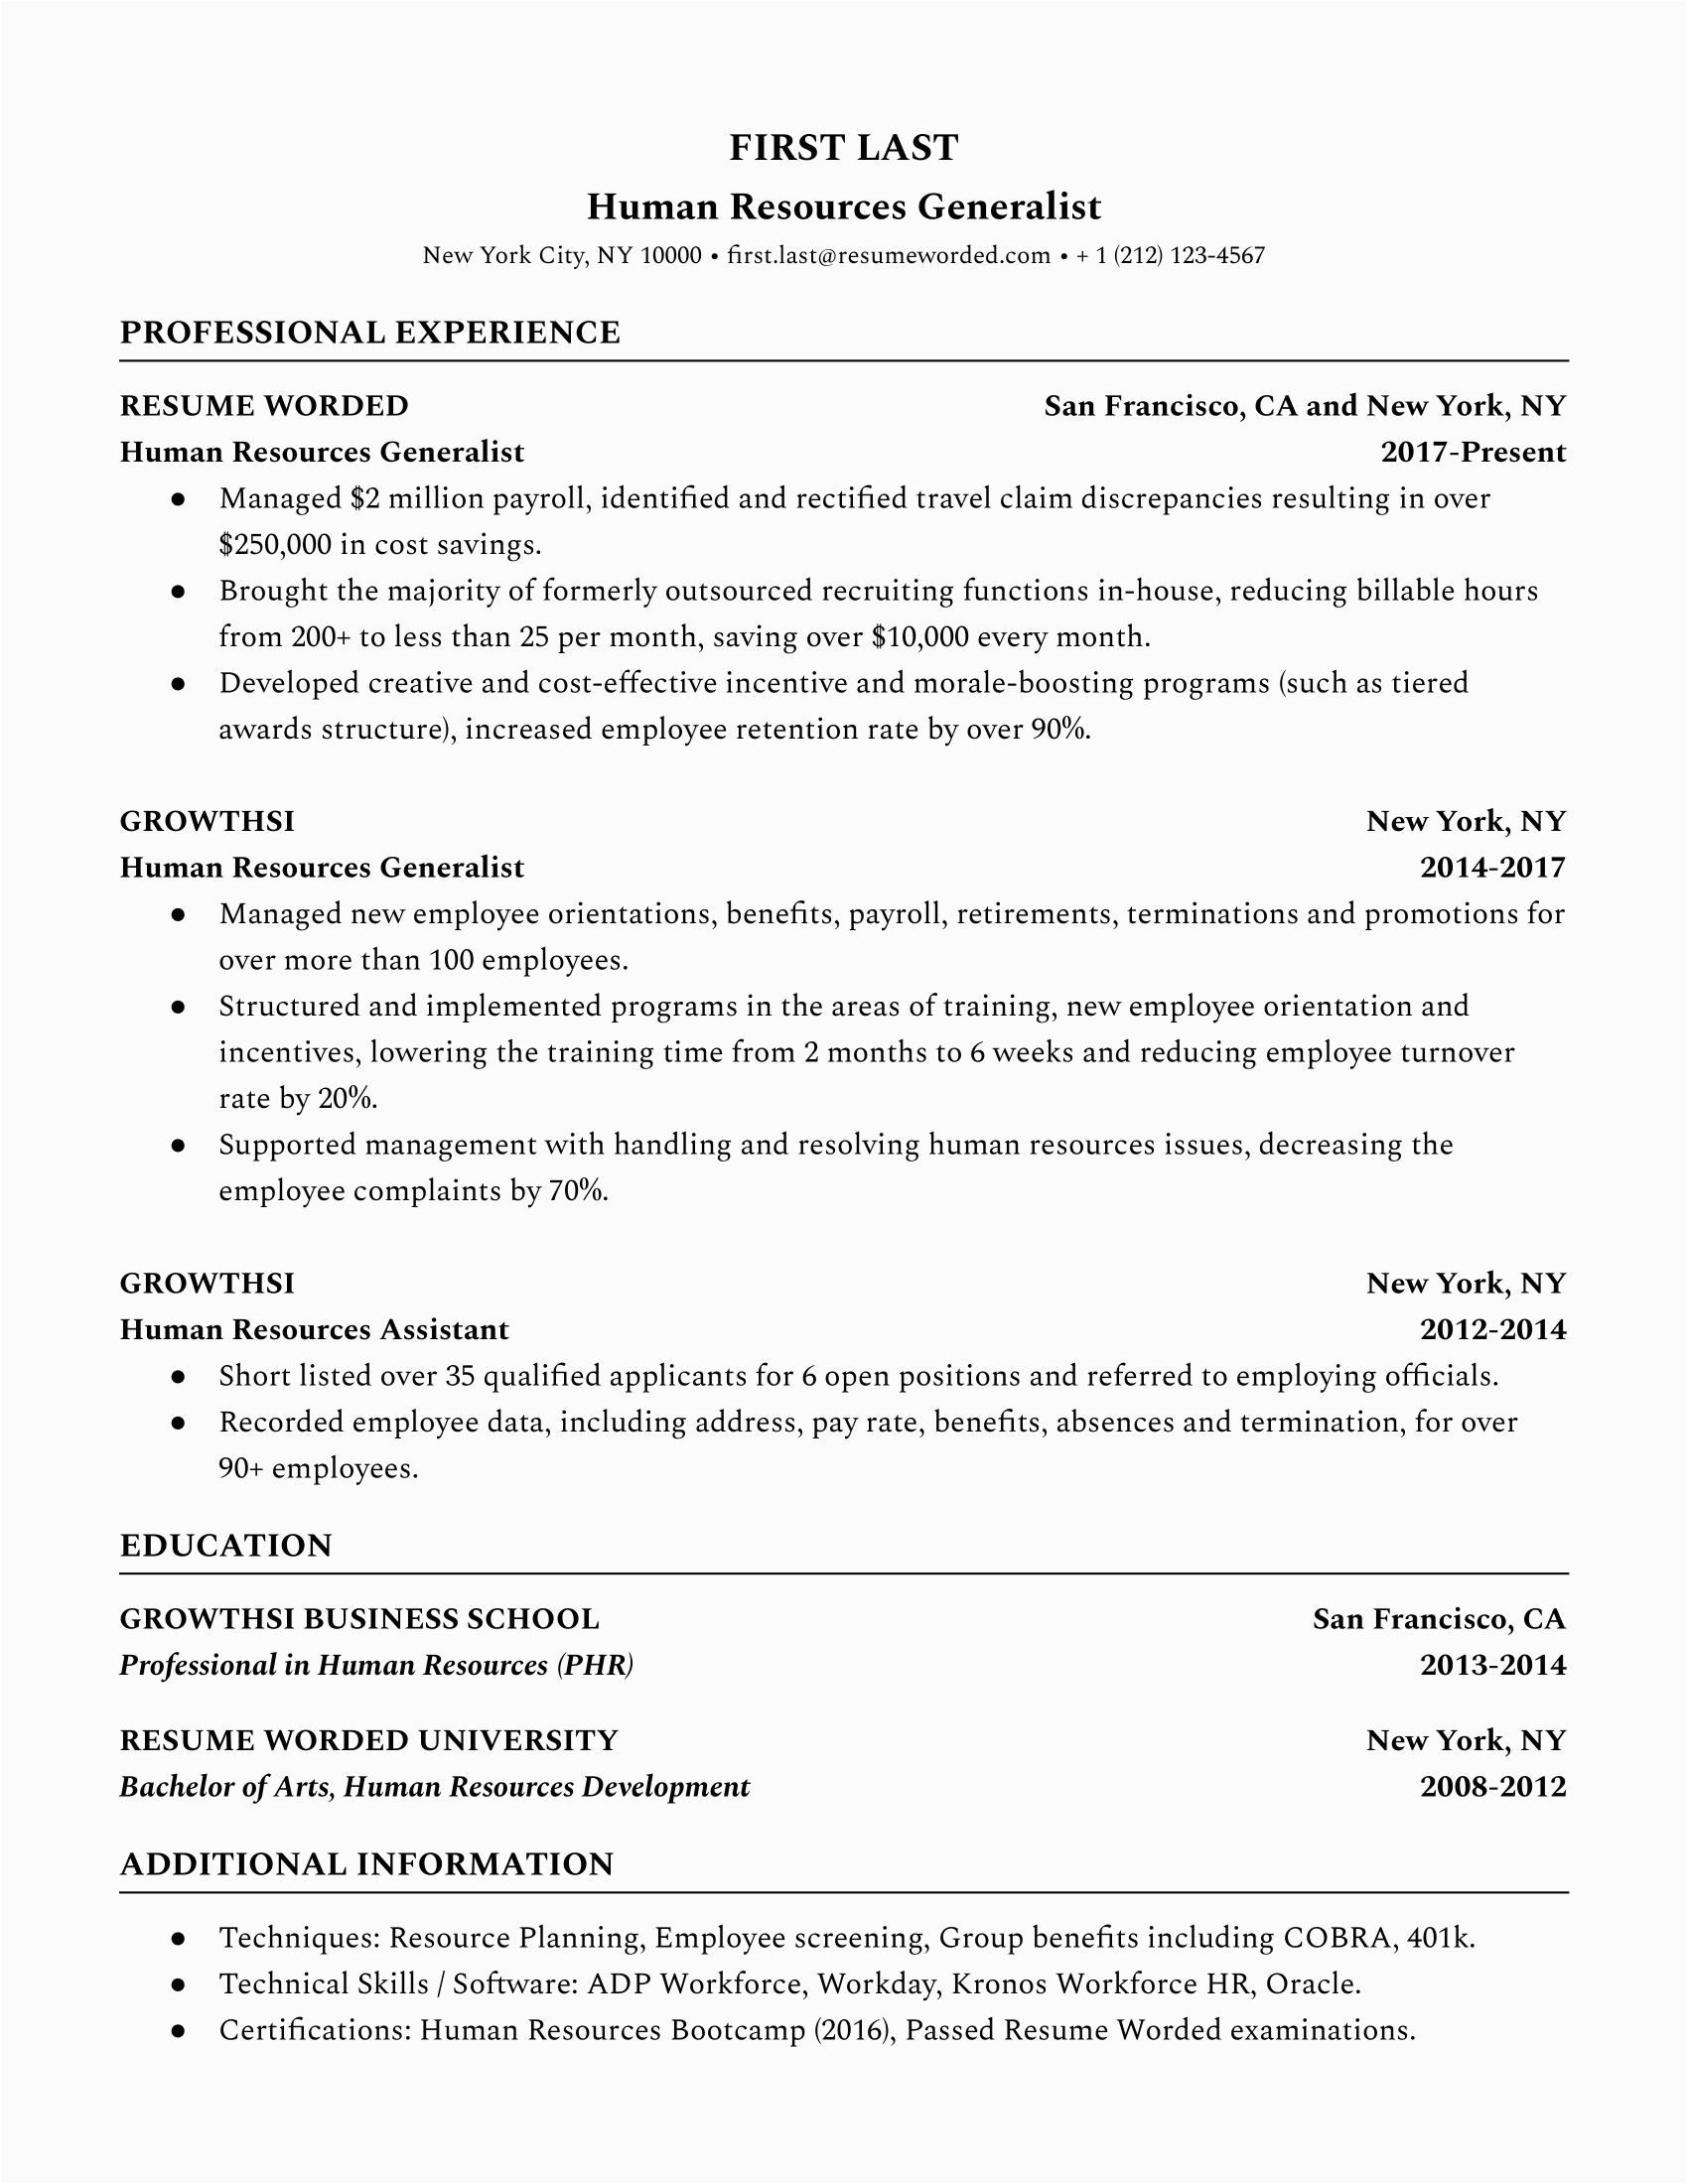 Resume Profile Samples for Human Resources Entry Level Human Resources Hr Resume Example for 2021